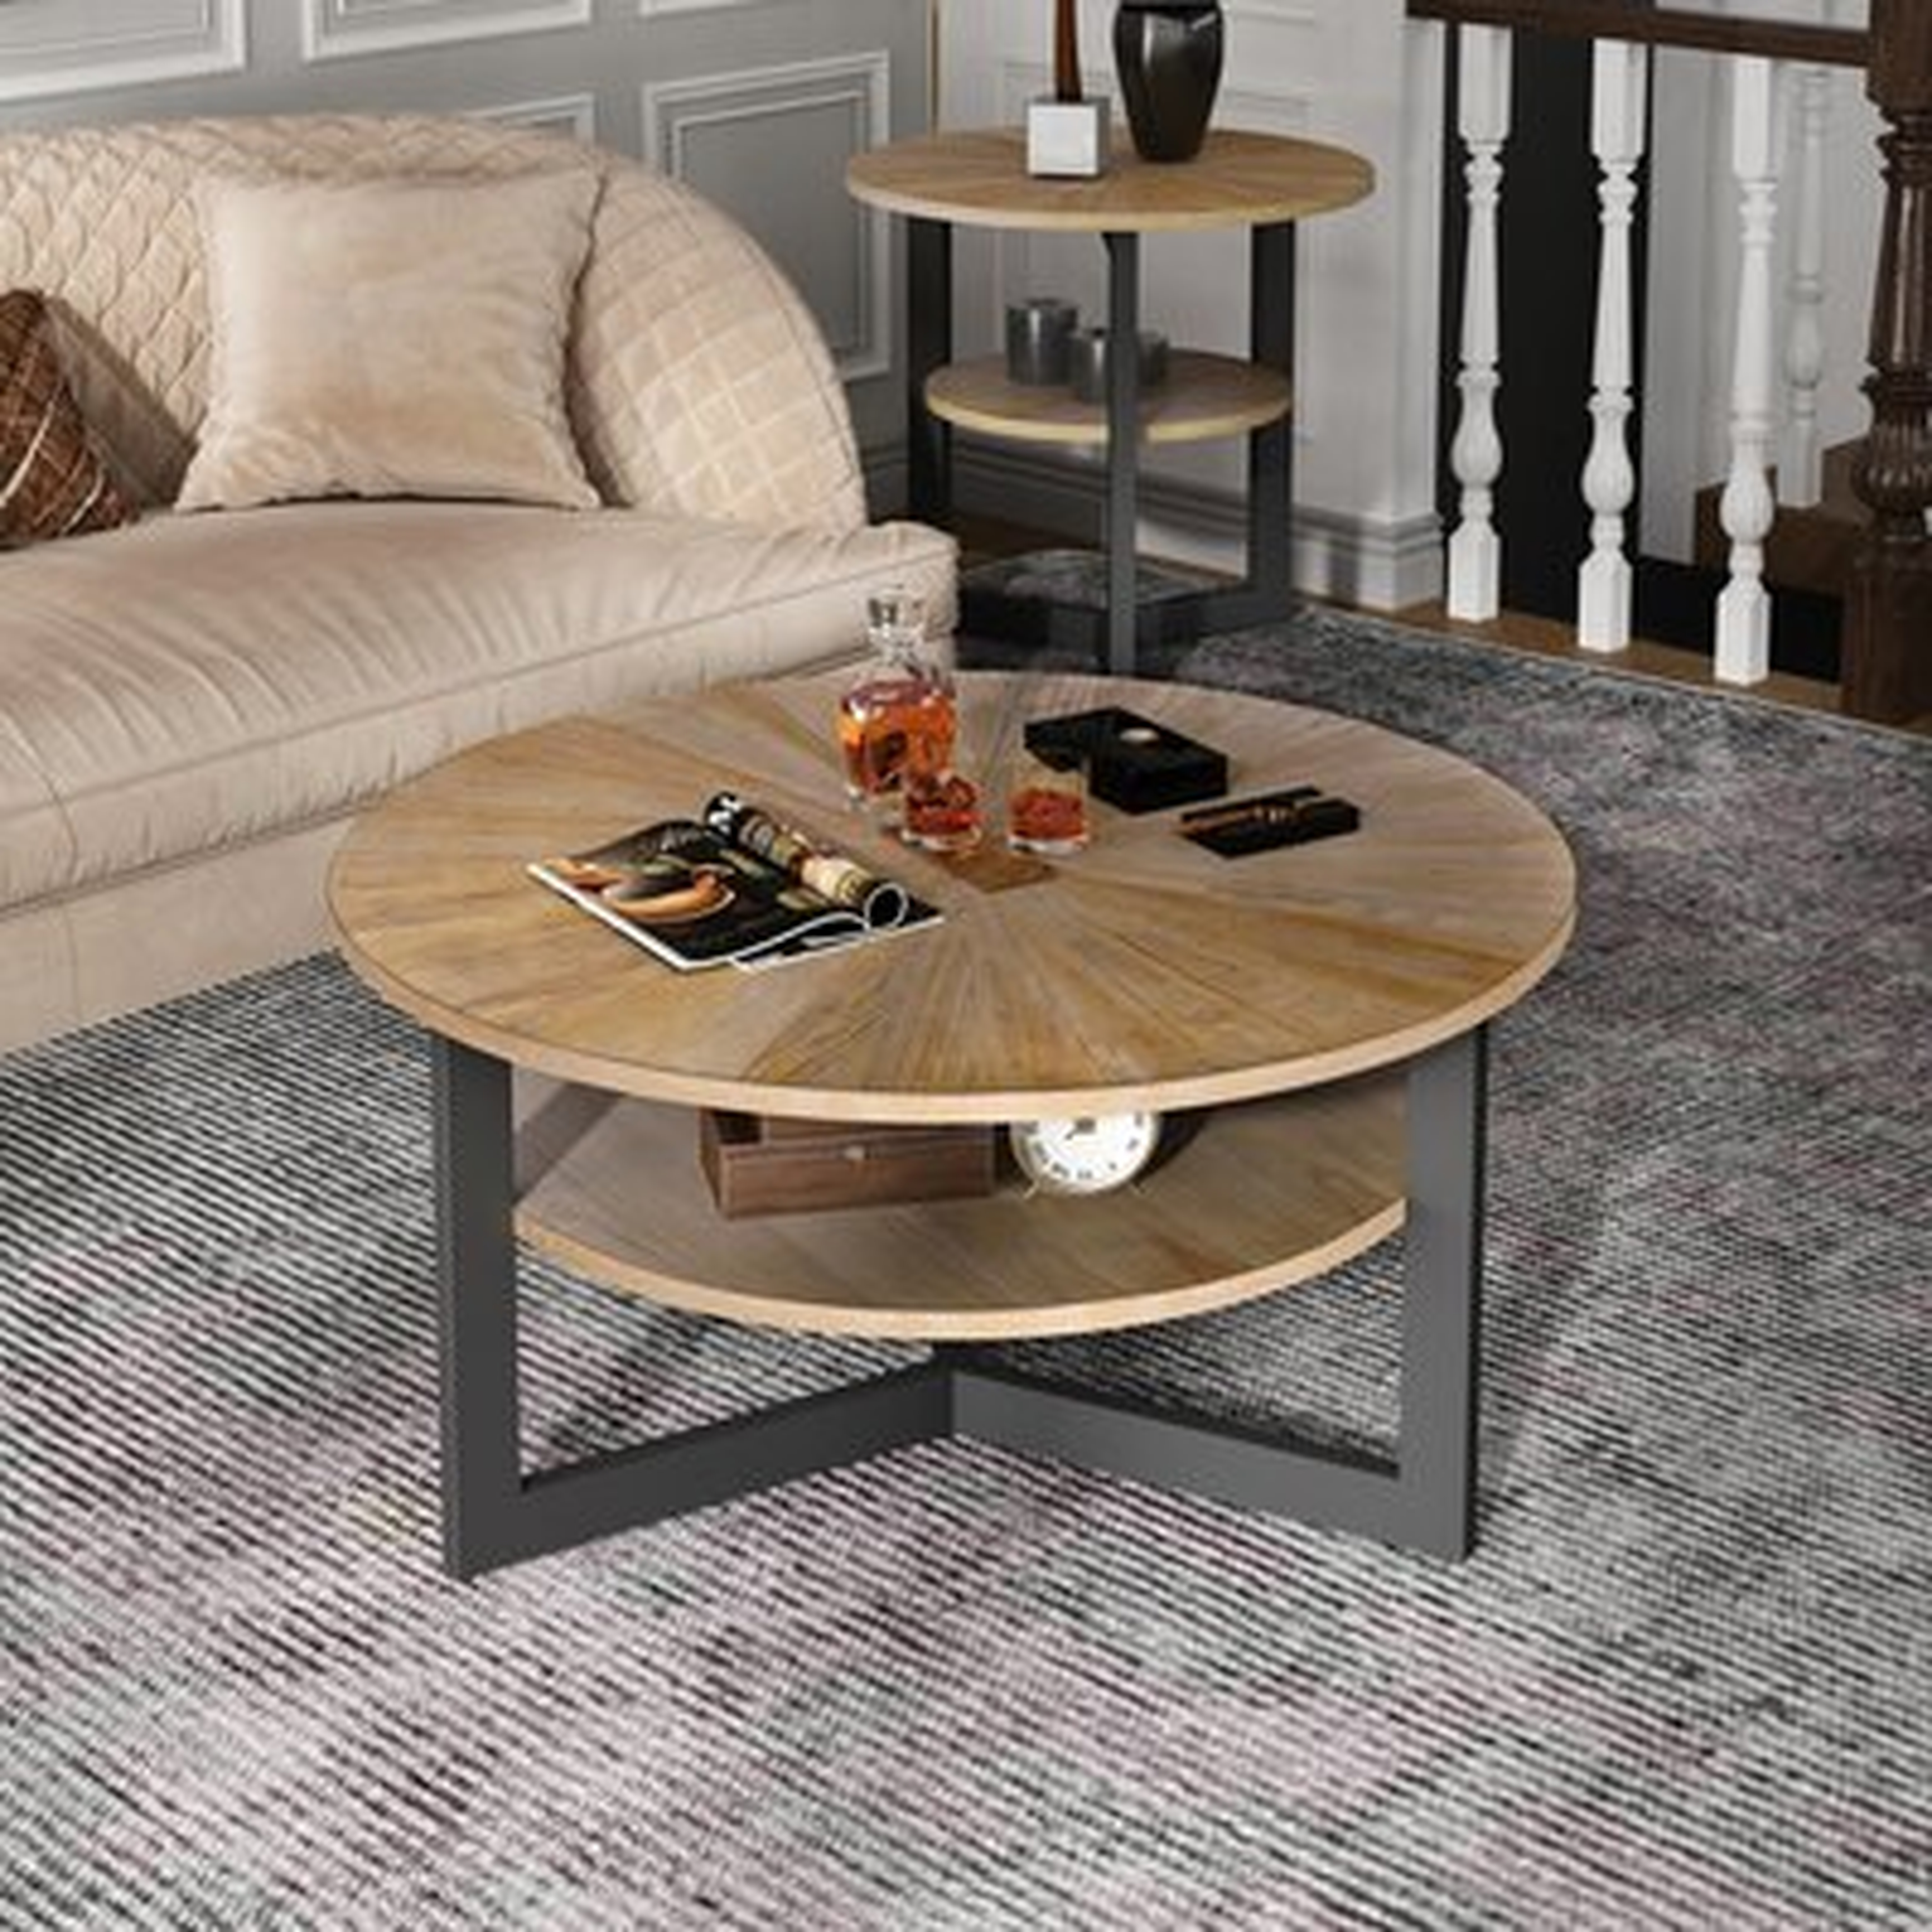 Round Coffee Table With Storage Space - Wayfair